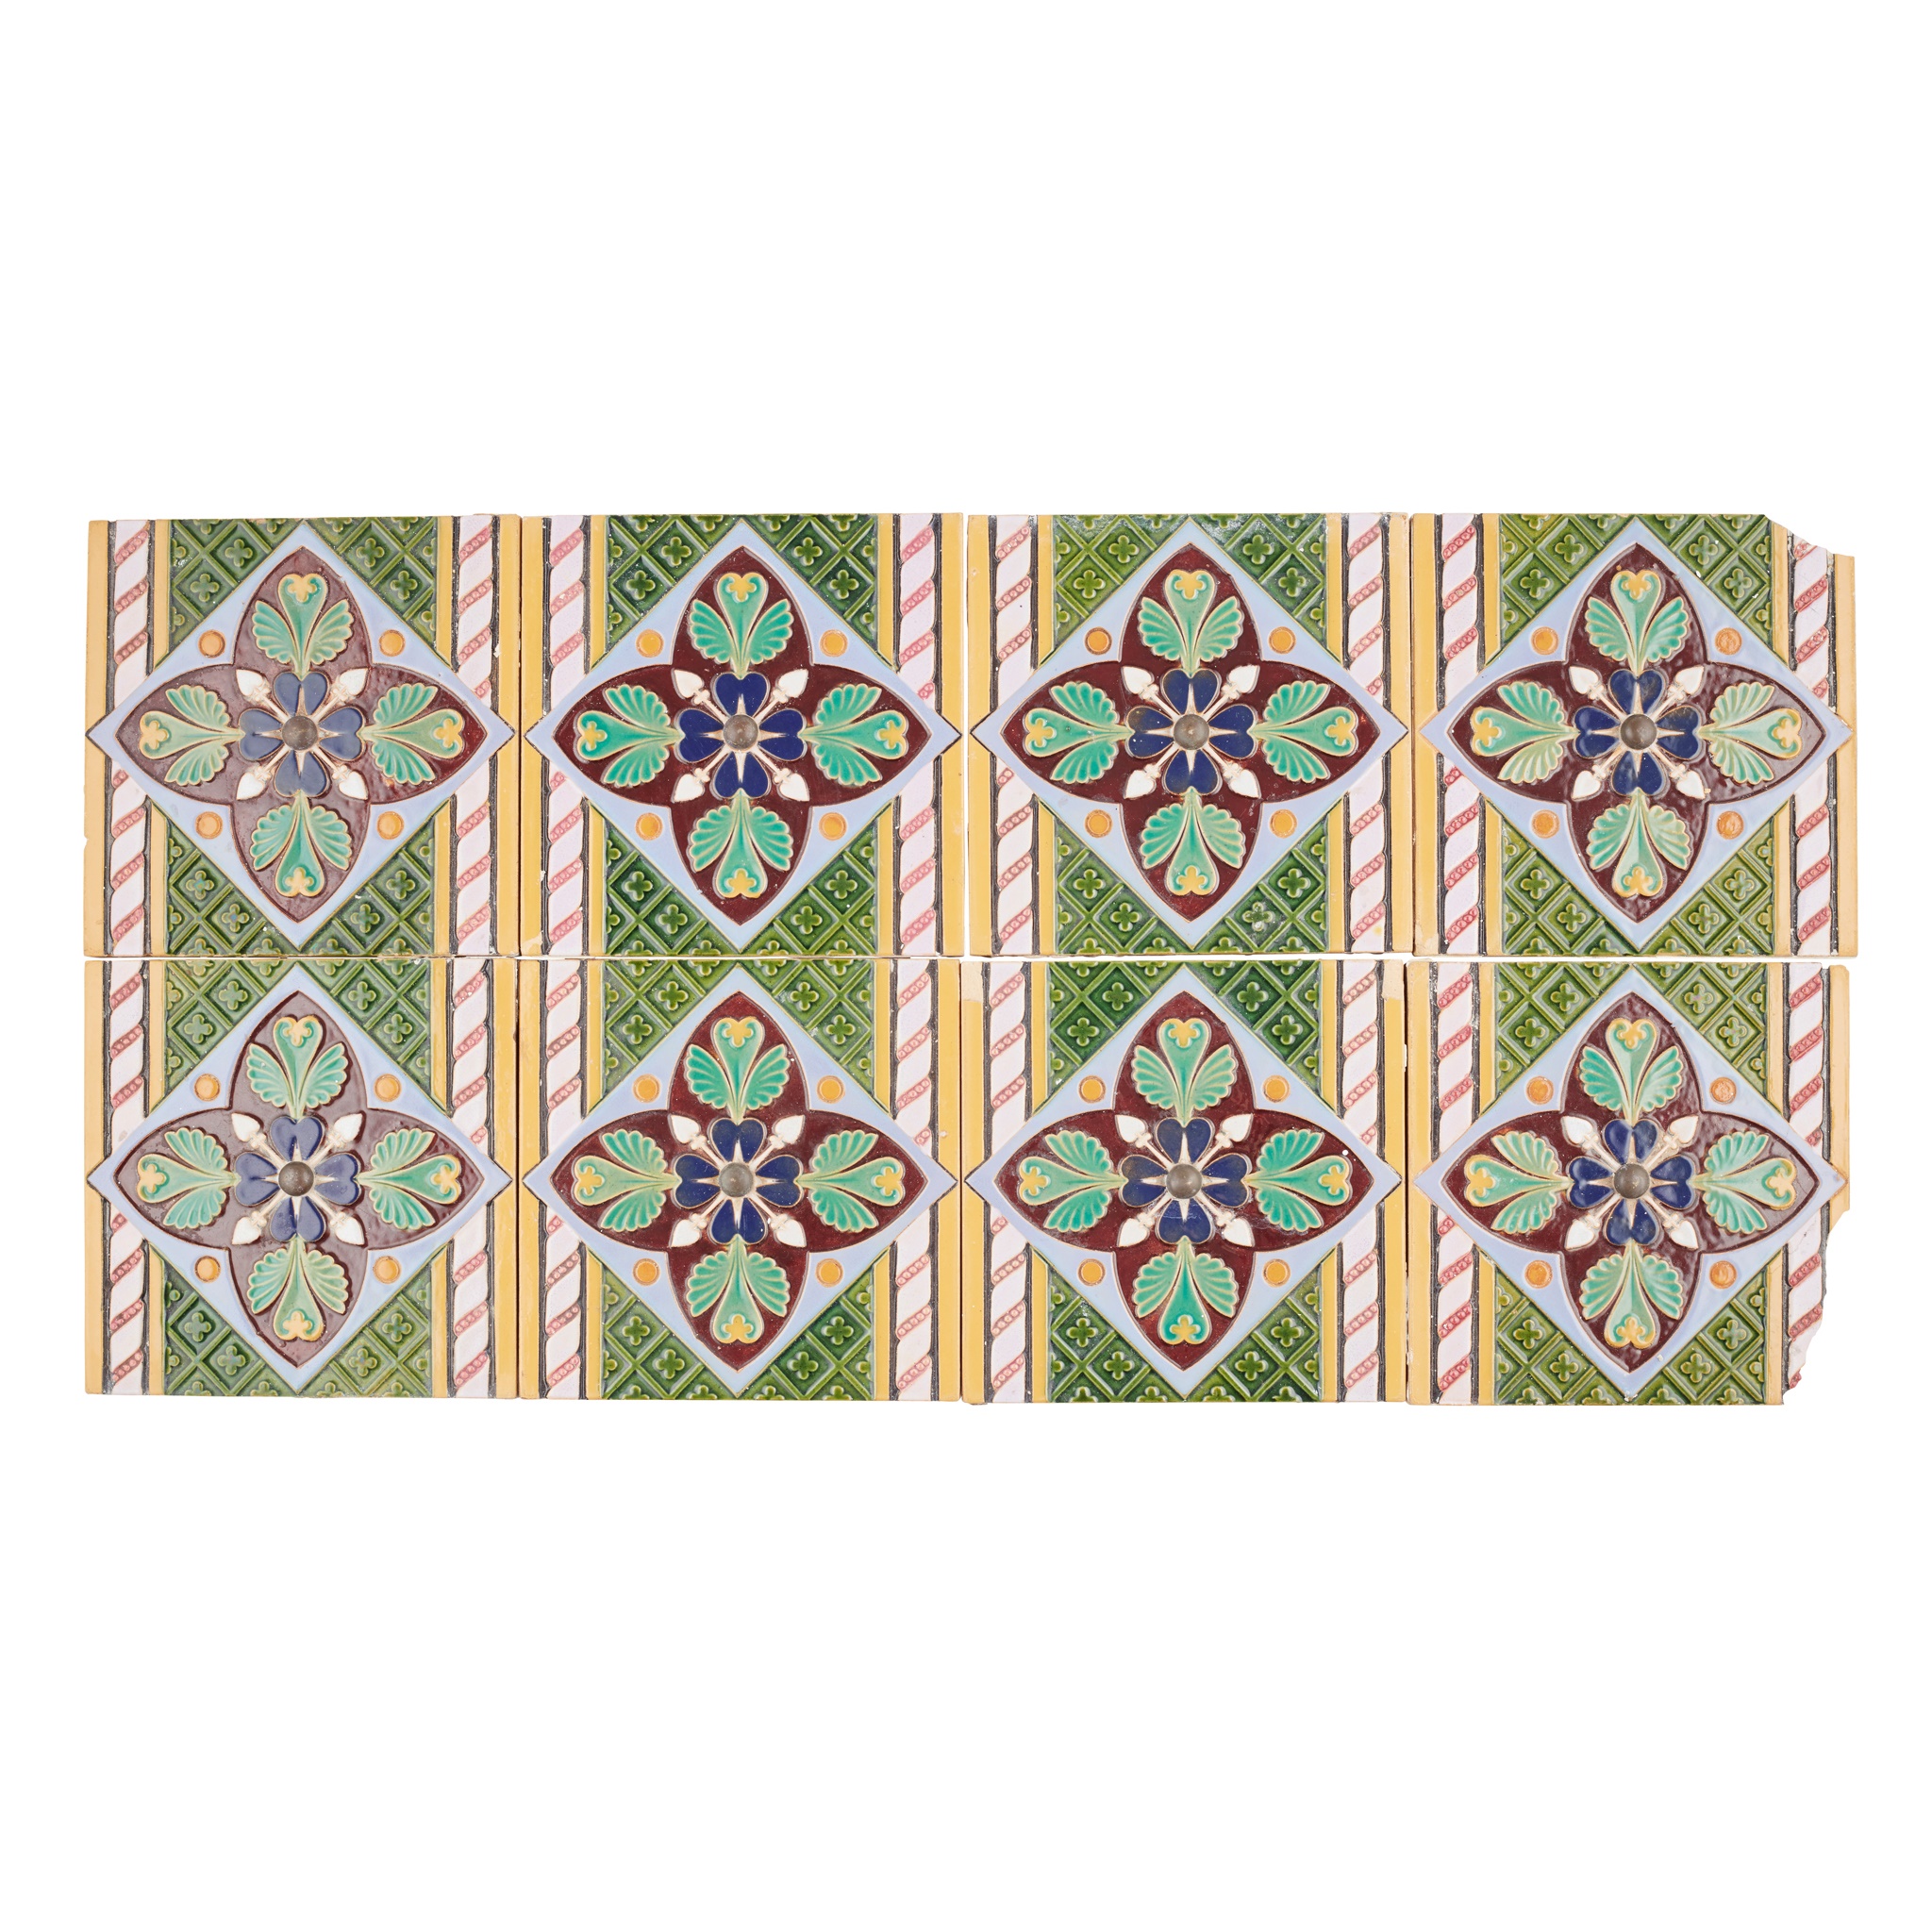 MINTON & CO GROUP OF GOTHIC REVIVAL TILES, CIRCA 1880 - Image 5 of 13